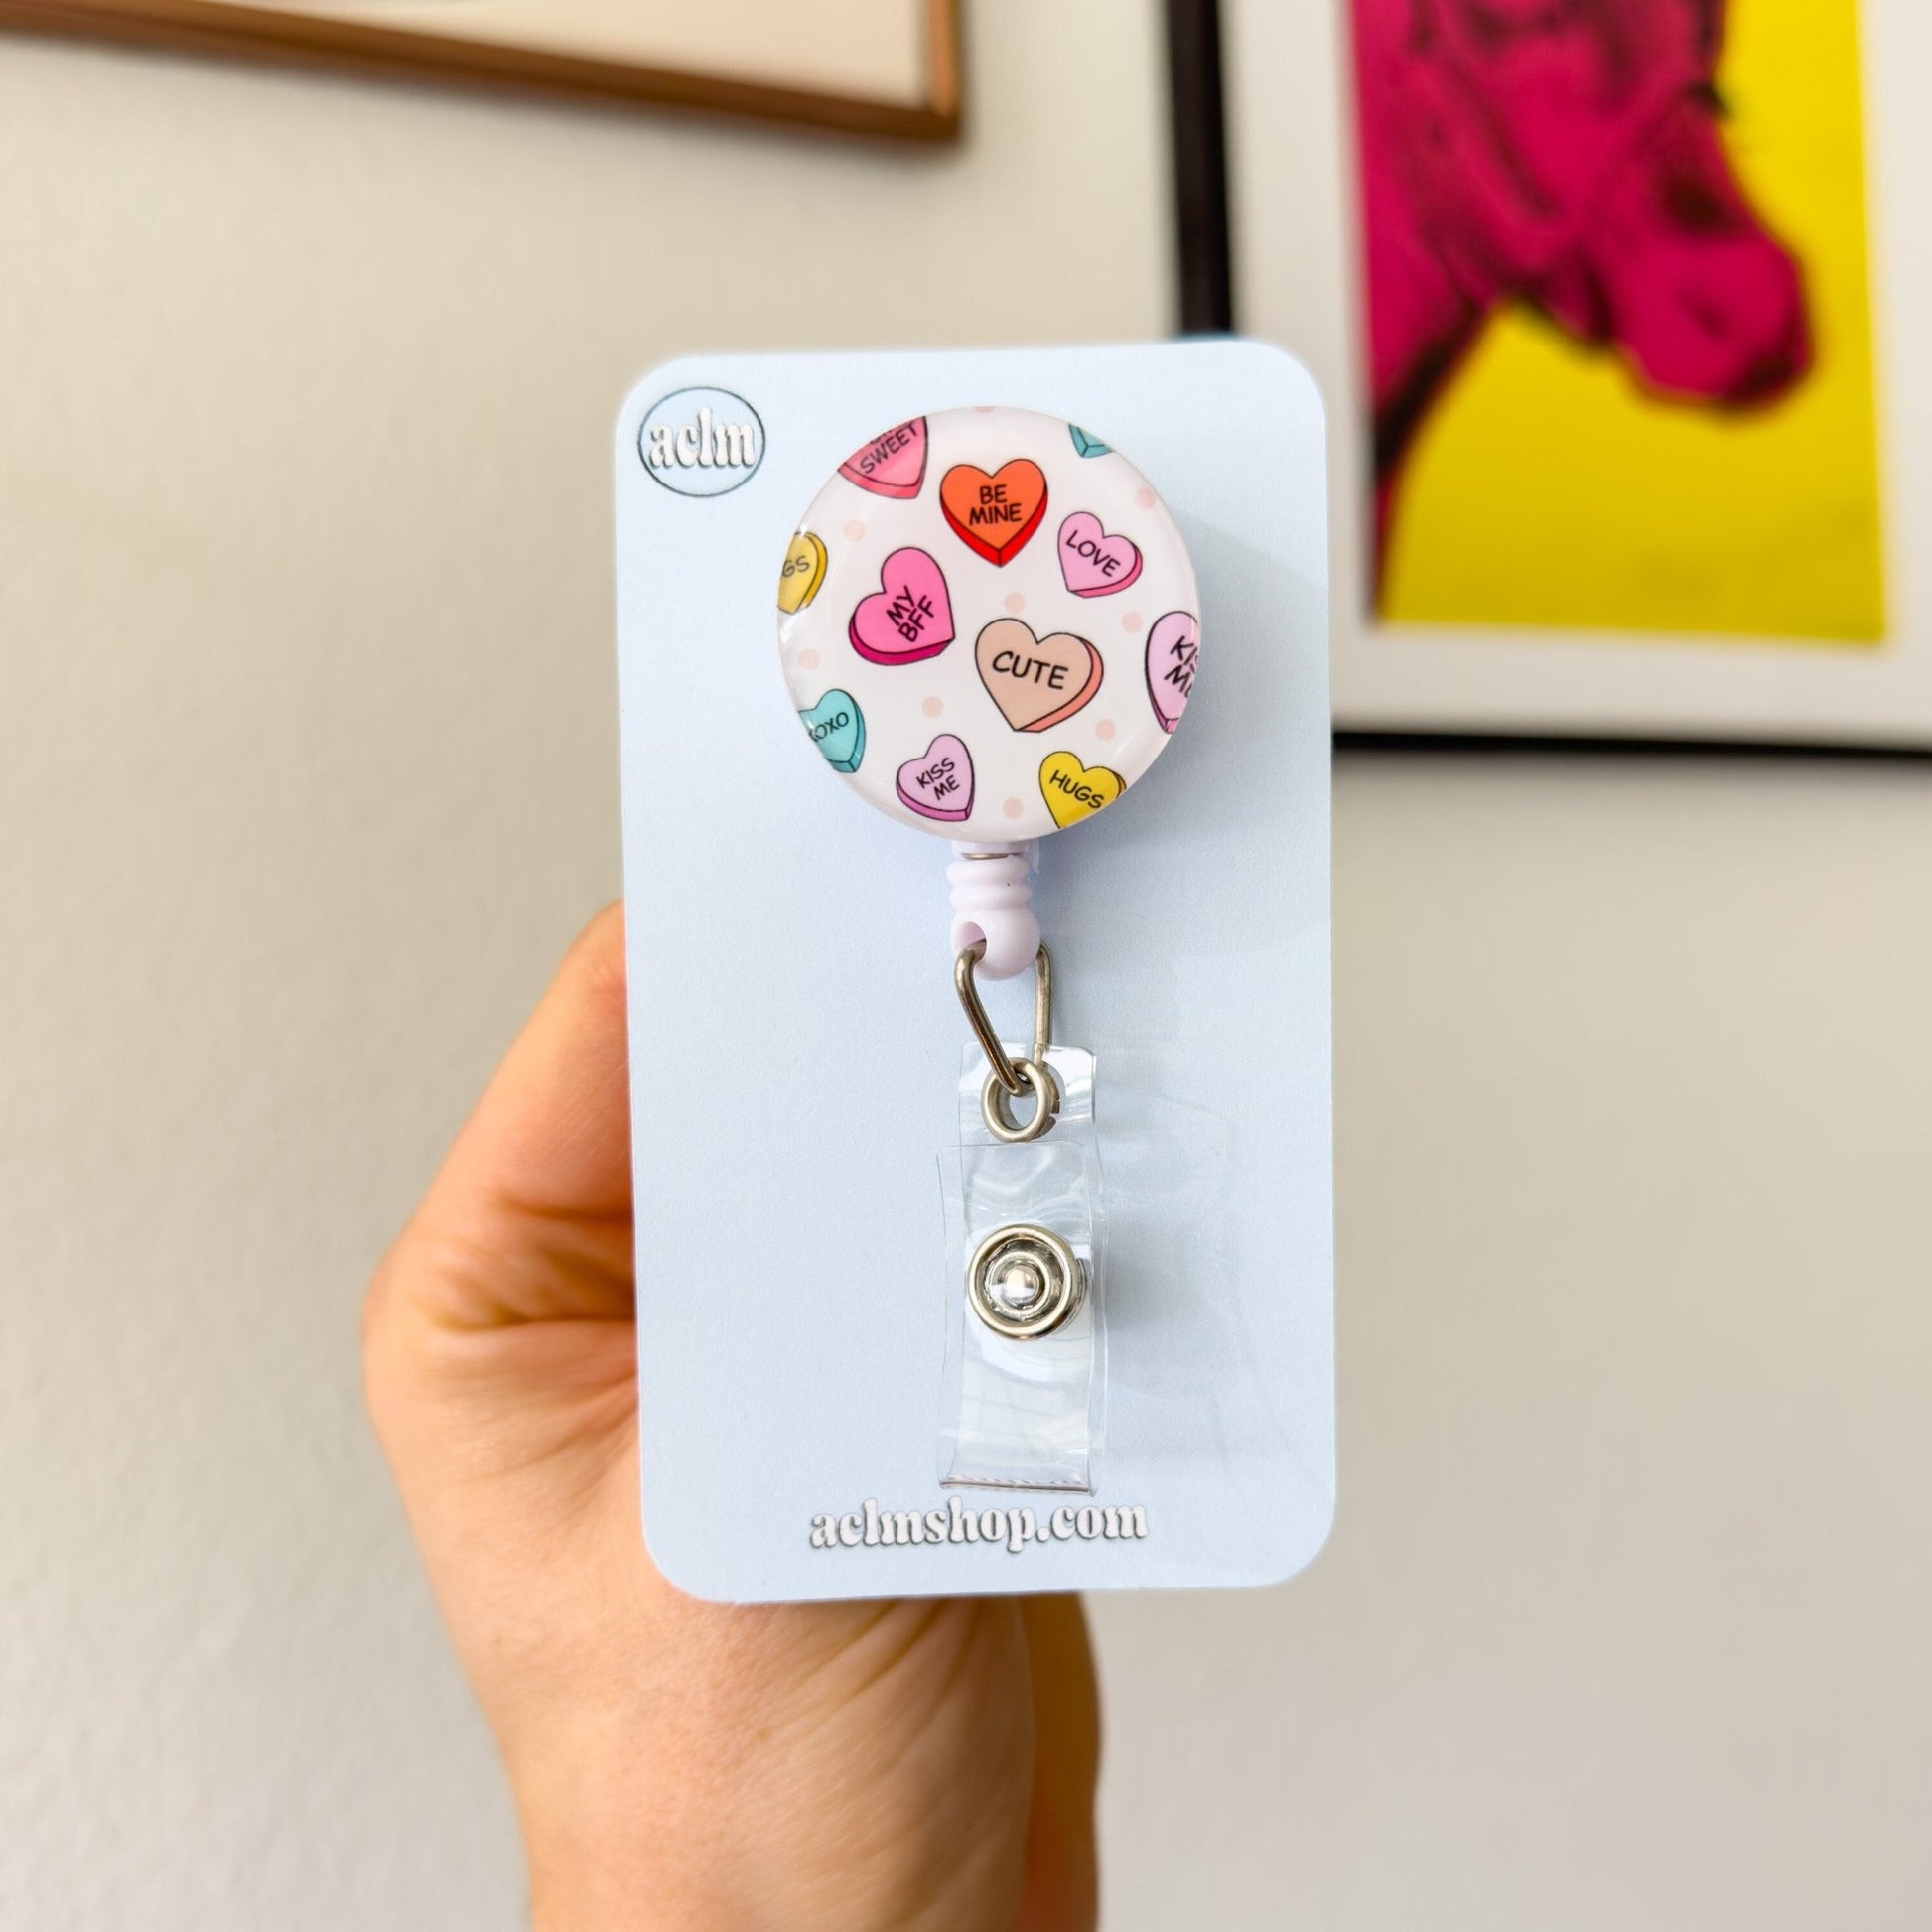 Cute Badge Reel Nurse - Candy Hearts Labor and Delivery ER ID Retractable Name Tag Buddy Valentine's Day Galentine's Gift - Acclaim Status Co Acclaim Status Co Alligator Clip